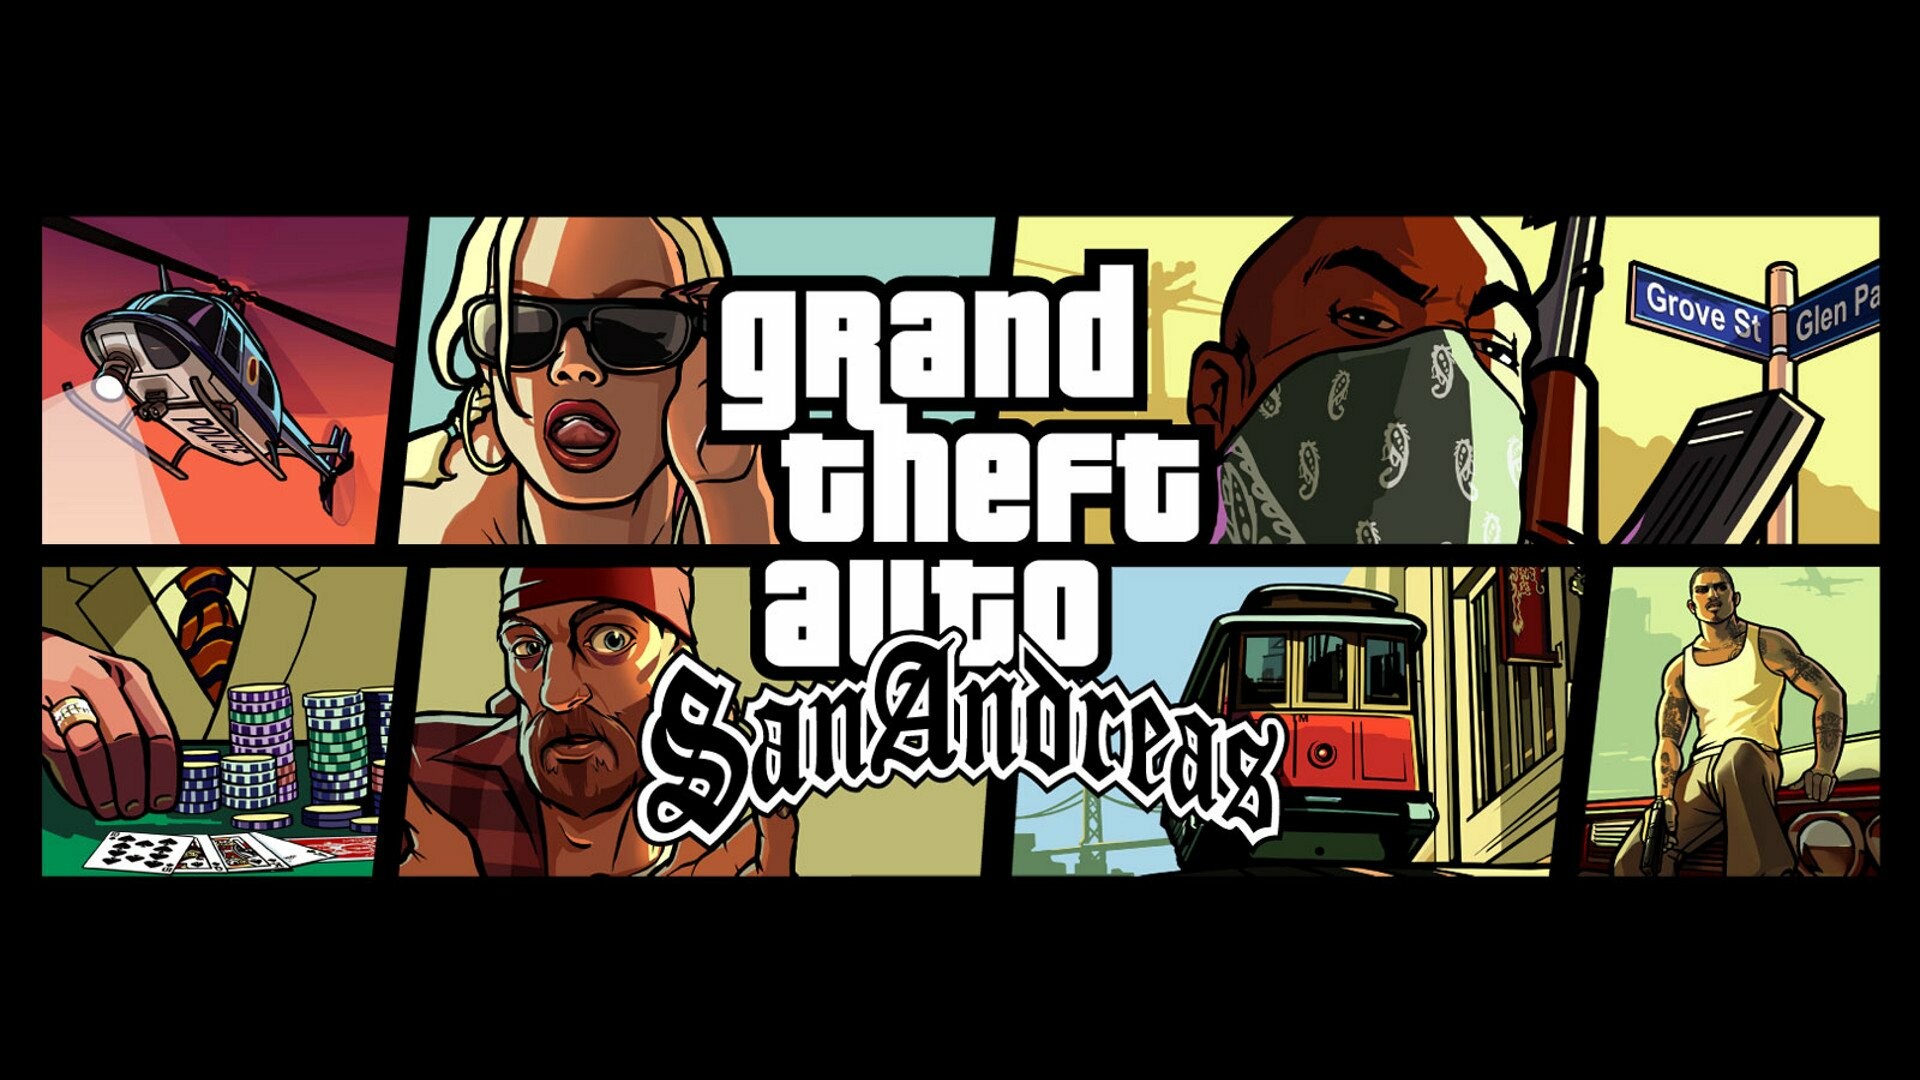 Grand Theft Auto: San Andreas: An iconic video game in the GTA series set in an open-world environment. 1920x1080 Full HD Wallpaper.